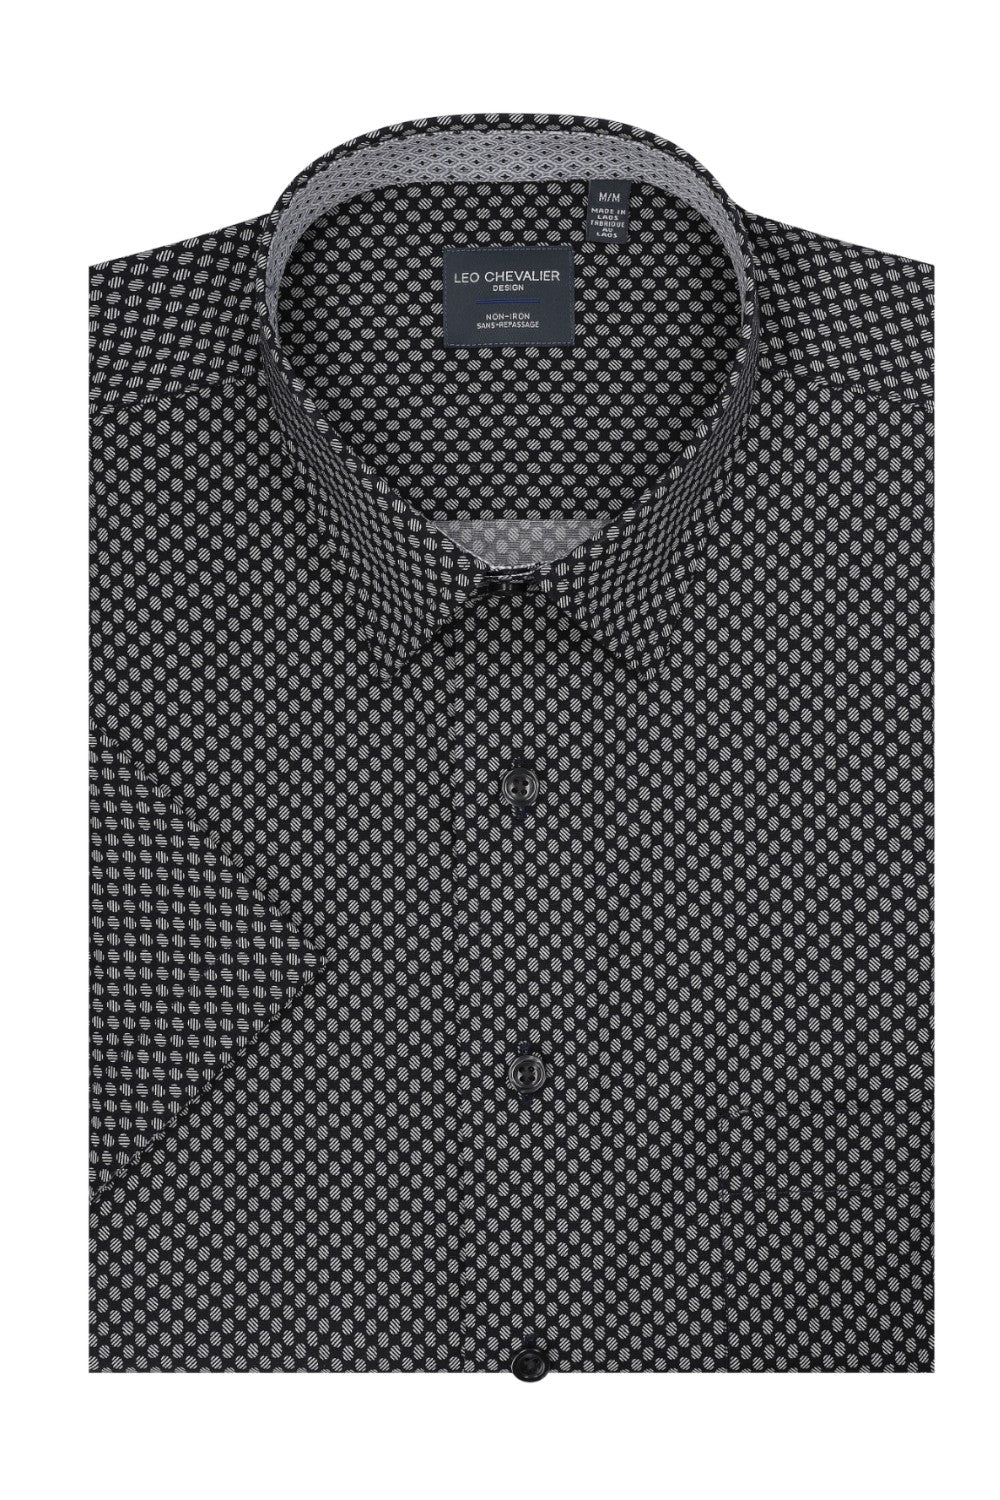 This Leo Chevalier Men's Short Sleeve is crafted from 100% cotton which provides excellent breathability and is non-iron for easy maintenance. The hidden button down collar and tall fit provide a tailored look for any occasion.